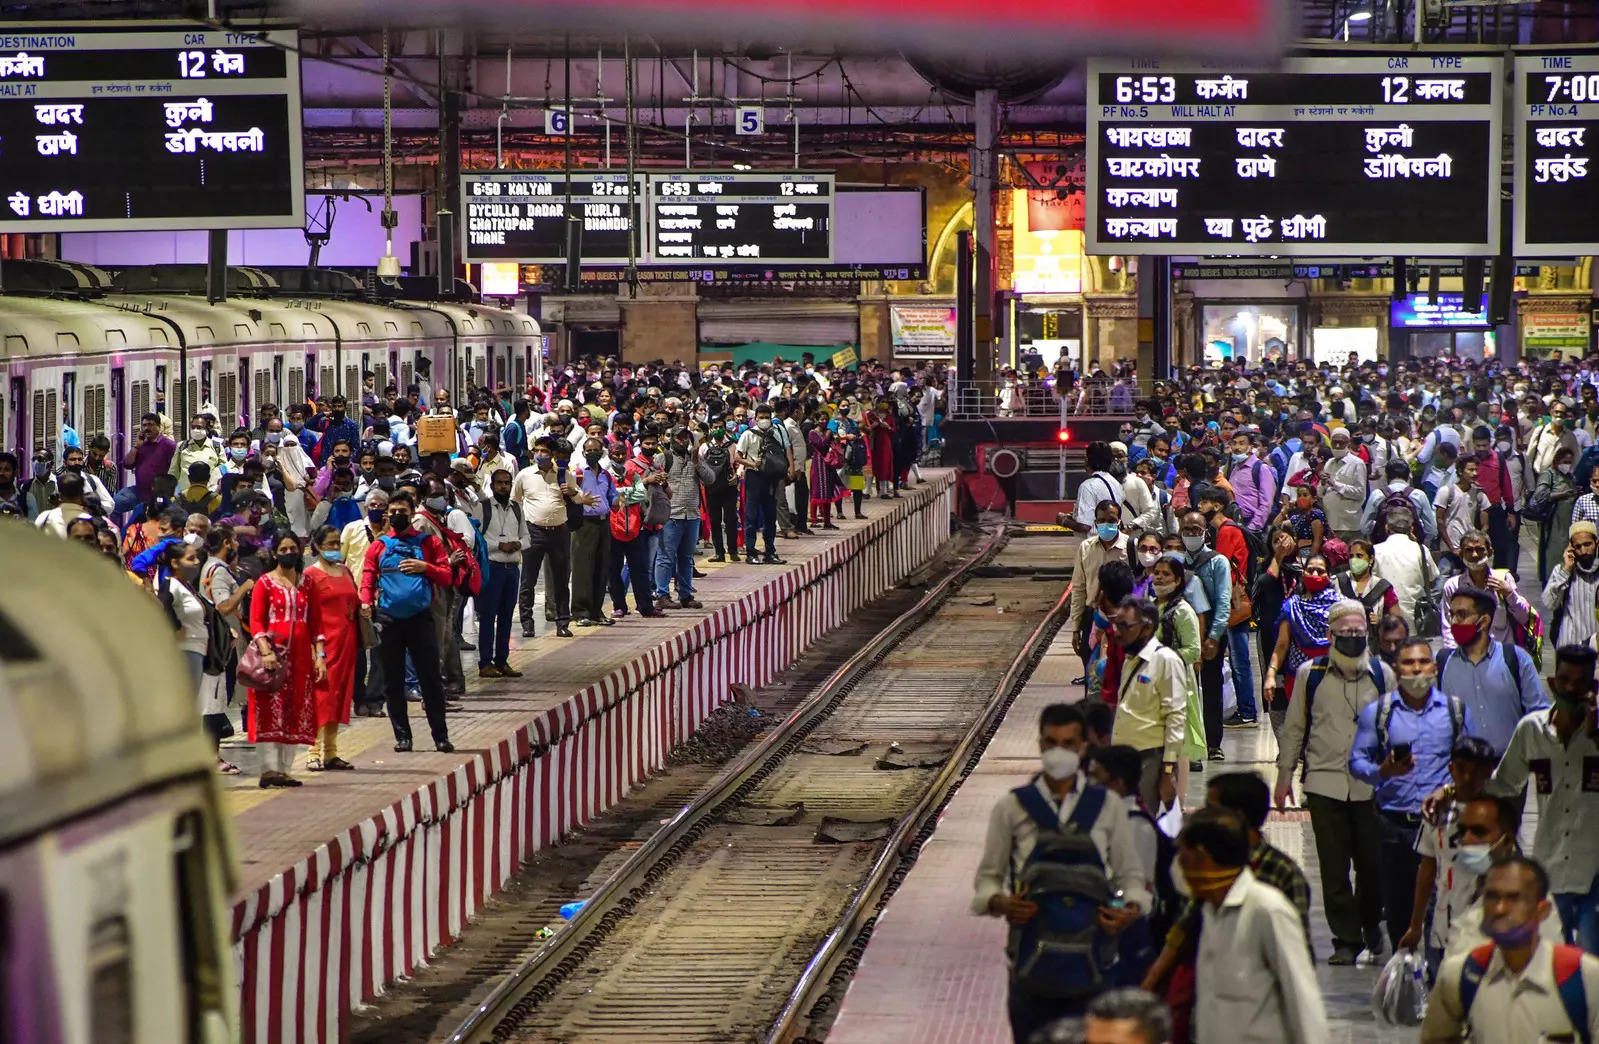 Mumbai: Commuters wait for their trains at platforms at the CSMT Station, in Mum...